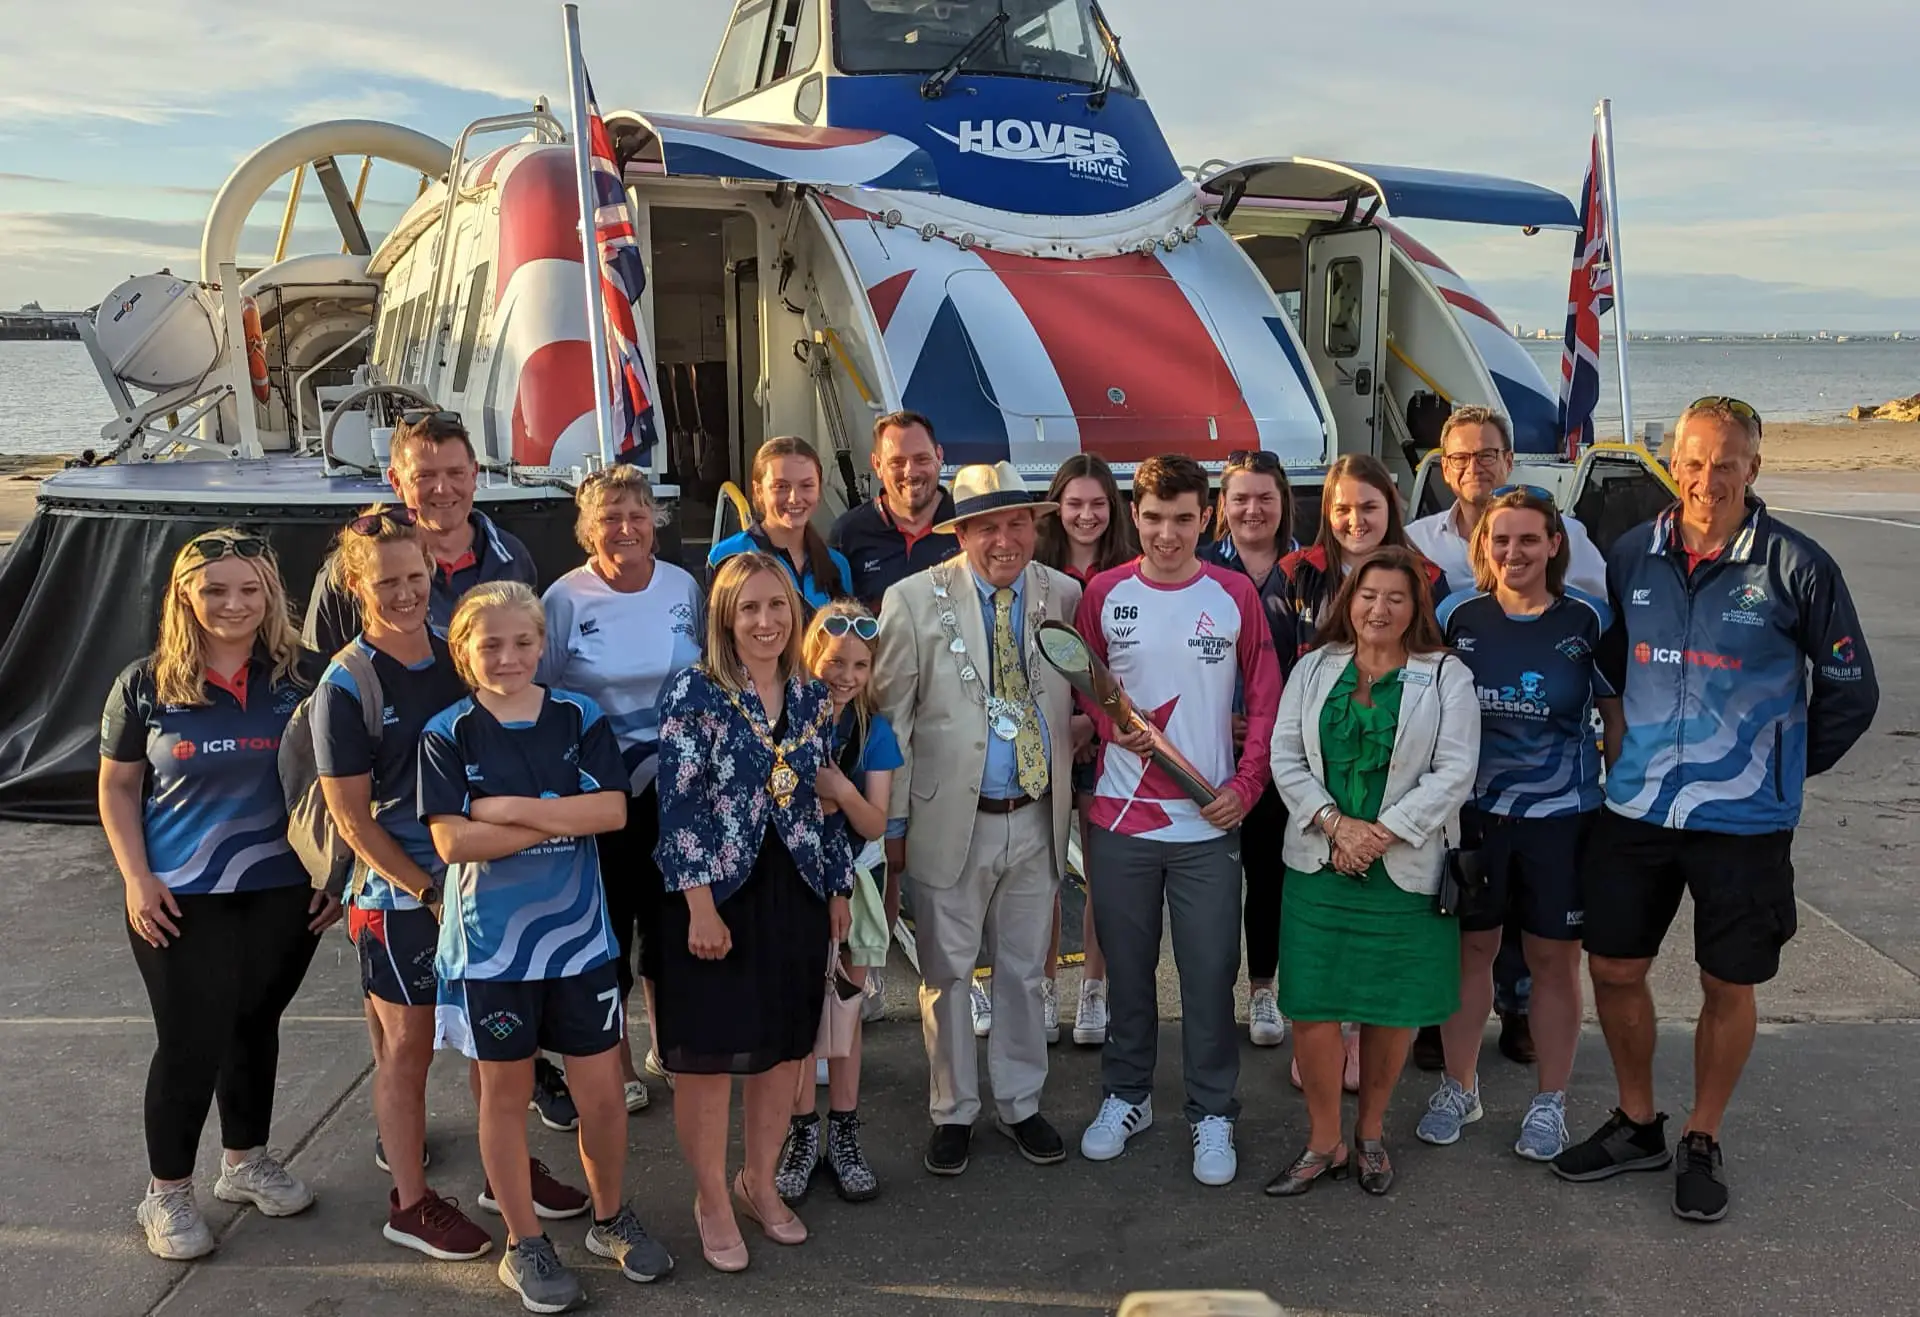 Local civic leaders and Island Games athletes greet Nicholas Earley, Queen's Baton Bearer, as he arrives by hovercraft on the Isle of Wight